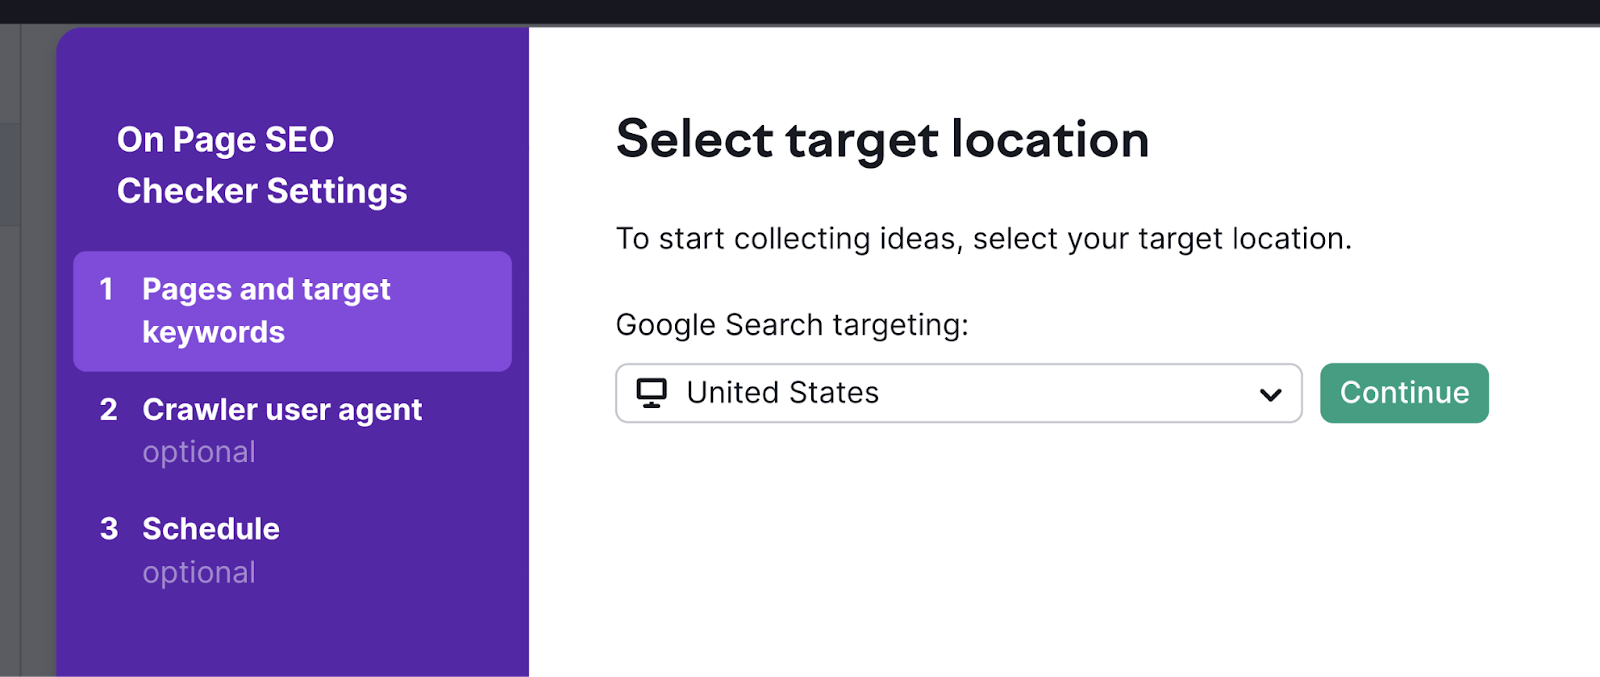 Target location set to United States in On Page SEO Checker tool